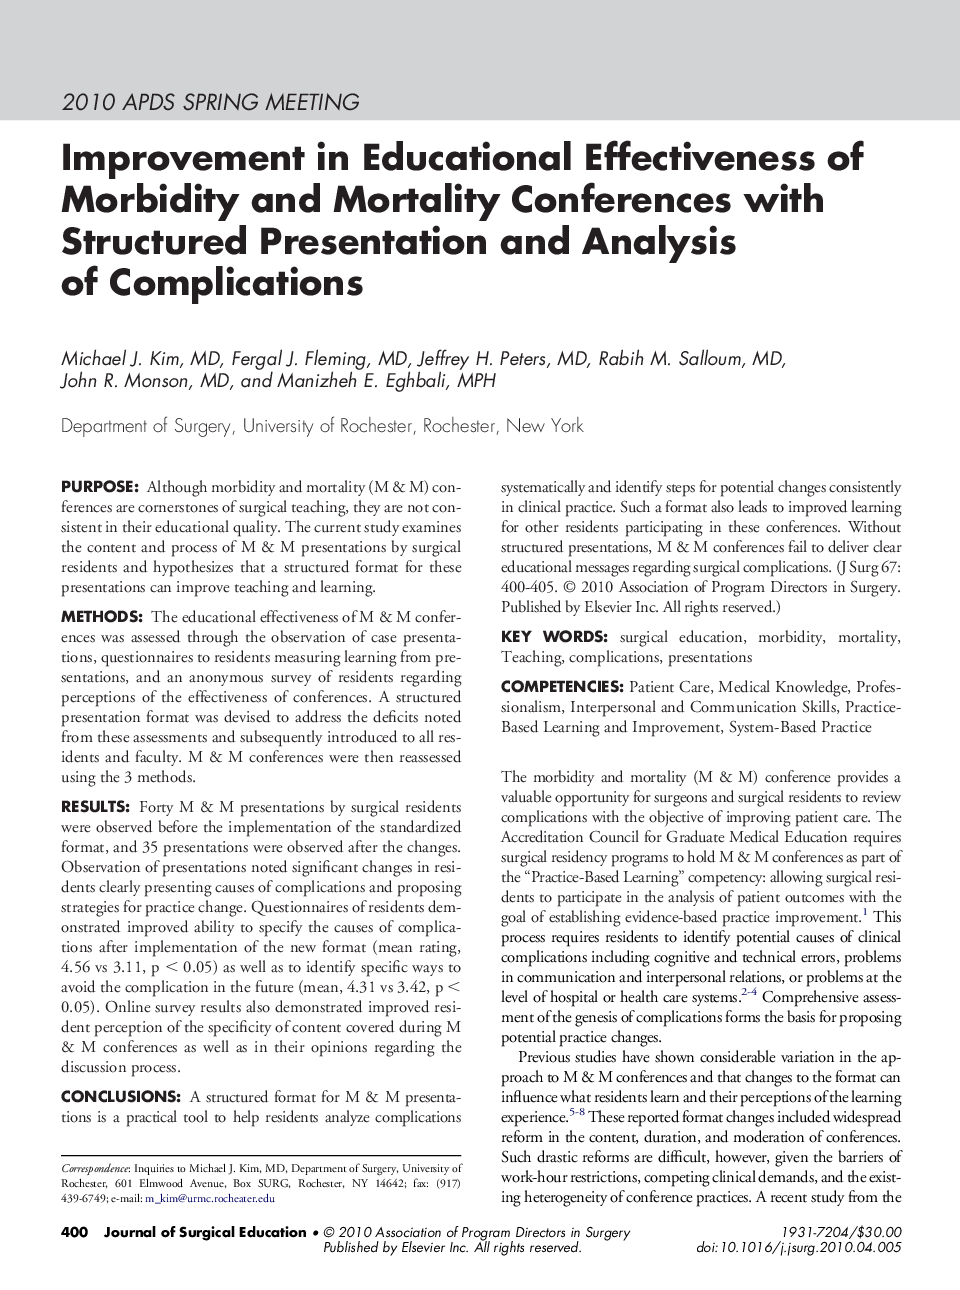 Improvement in Educational Effectiveness of Morbidity and Mortality Conferences with Structured Presentation and Analysis of Complications